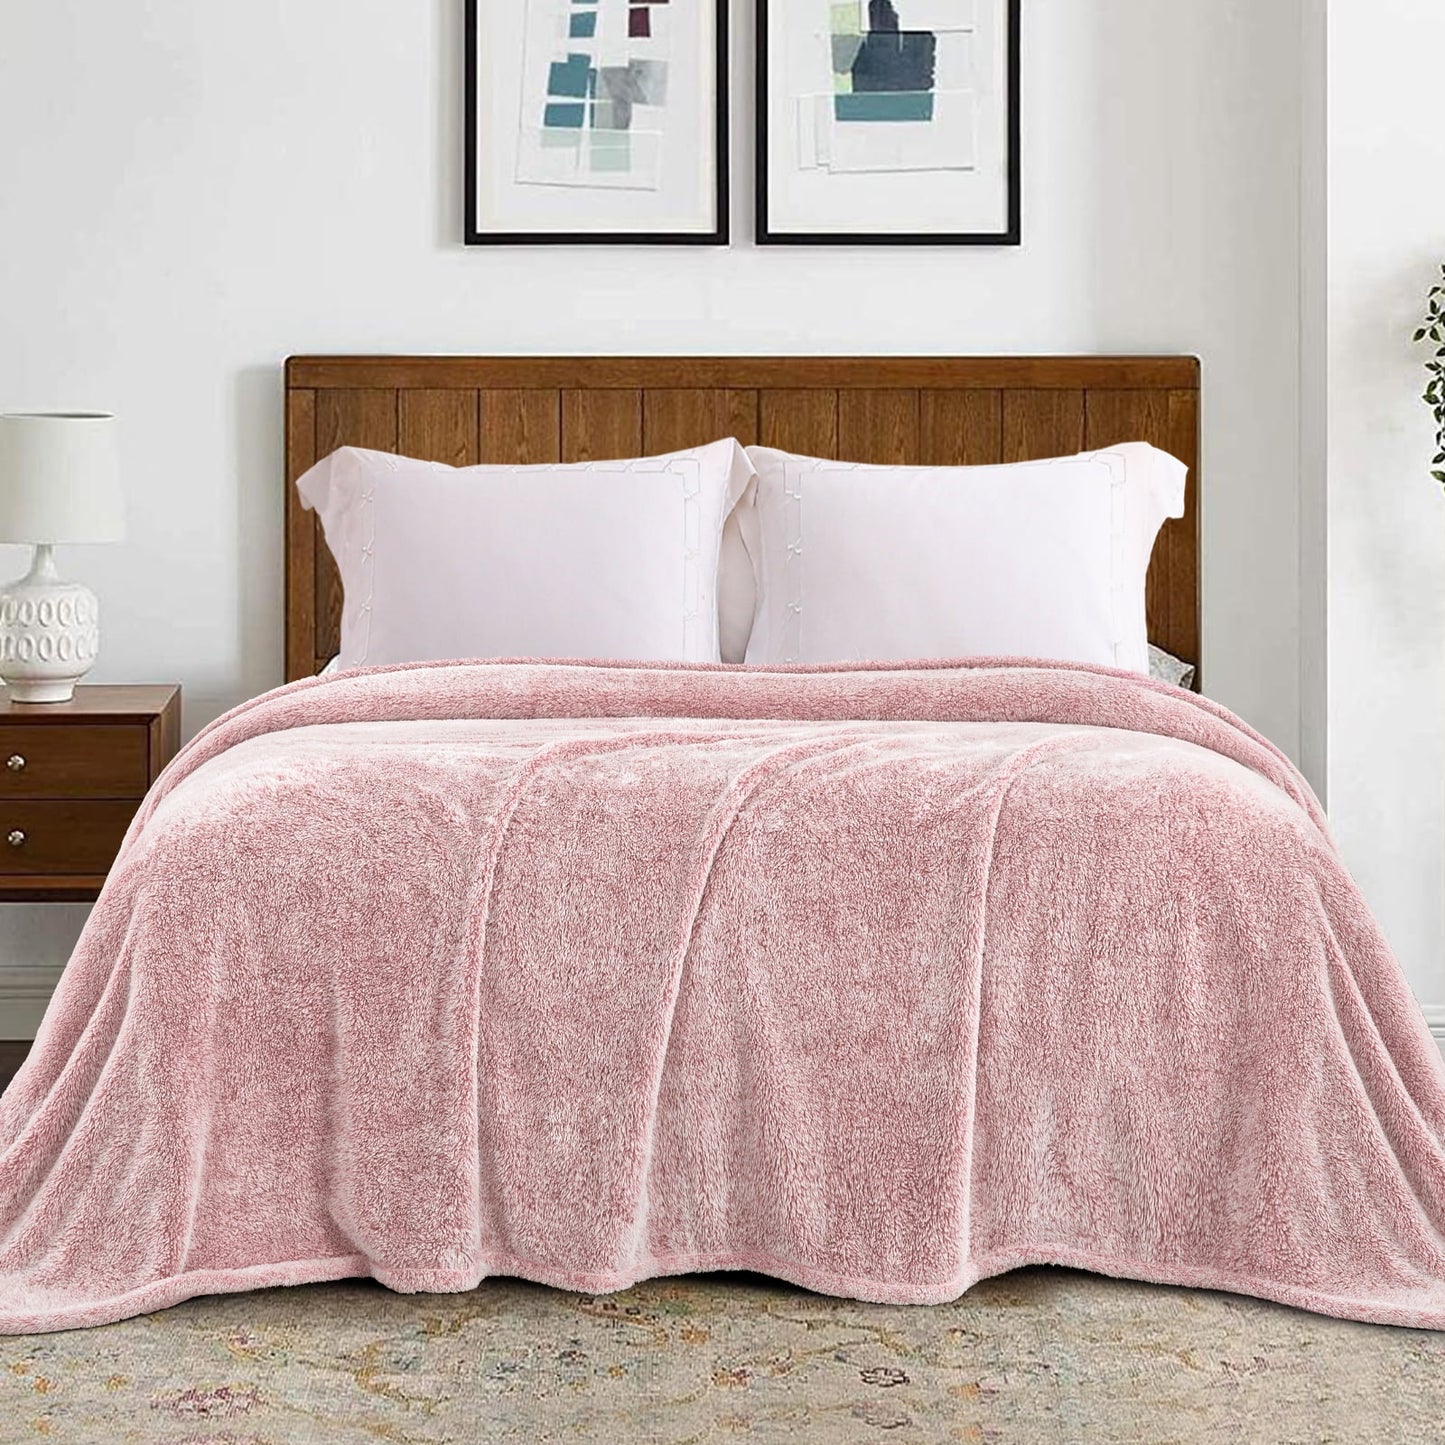 Exclusivo Mezcla Plush Fuzzy Fleece Queen Size Bed Blanket, Super Soft Fluffy and Thick Blankets for Travel Bed and Couch (Mixed Pink, 90x90 inches)